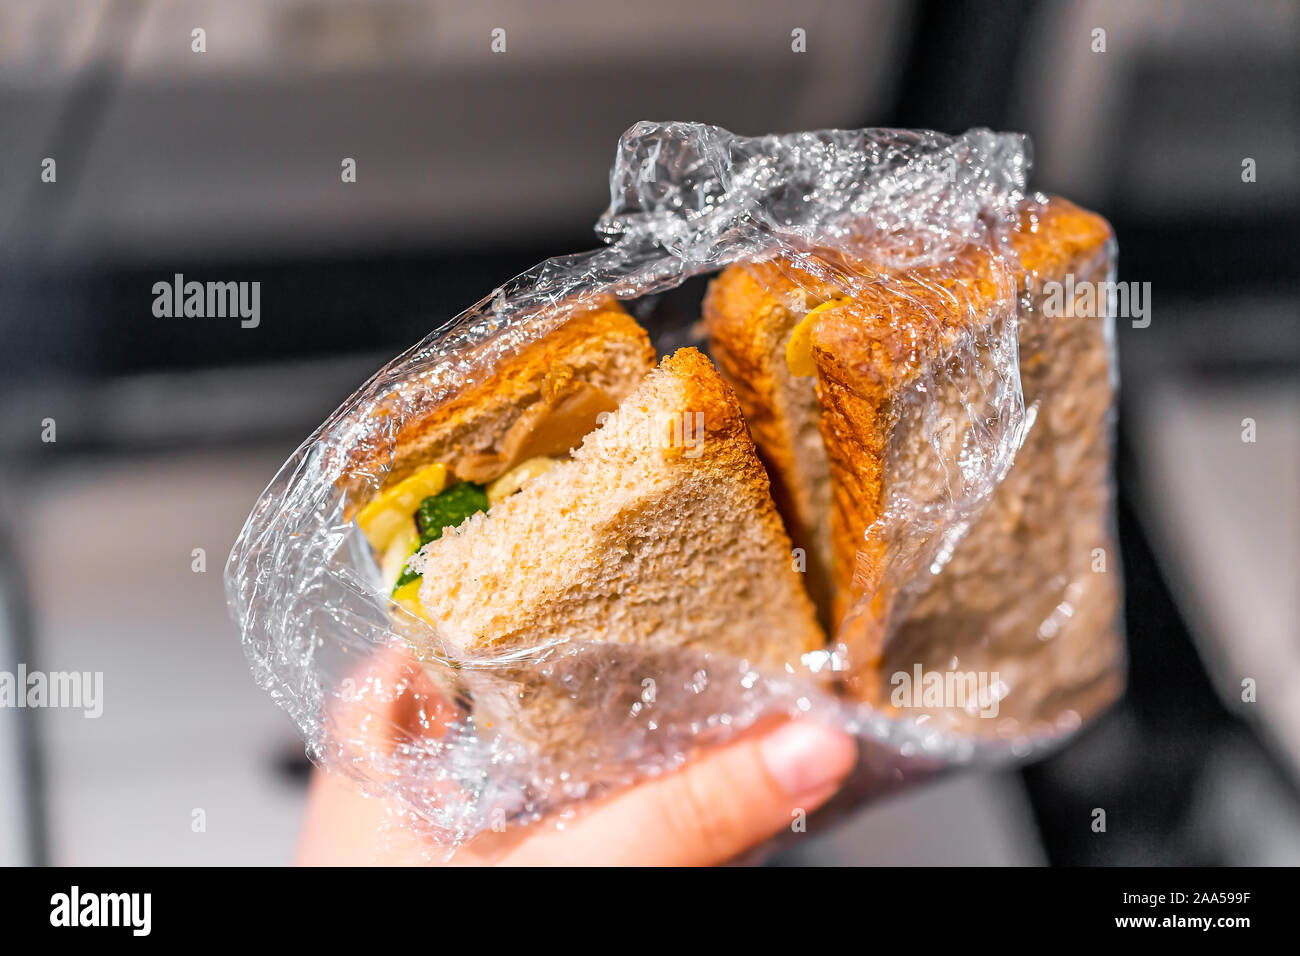 Closeup holding plastic wrapped whole wheat grain bread in airplane flight with crust and vegetable filling as vegan inflight meal Stock Photo